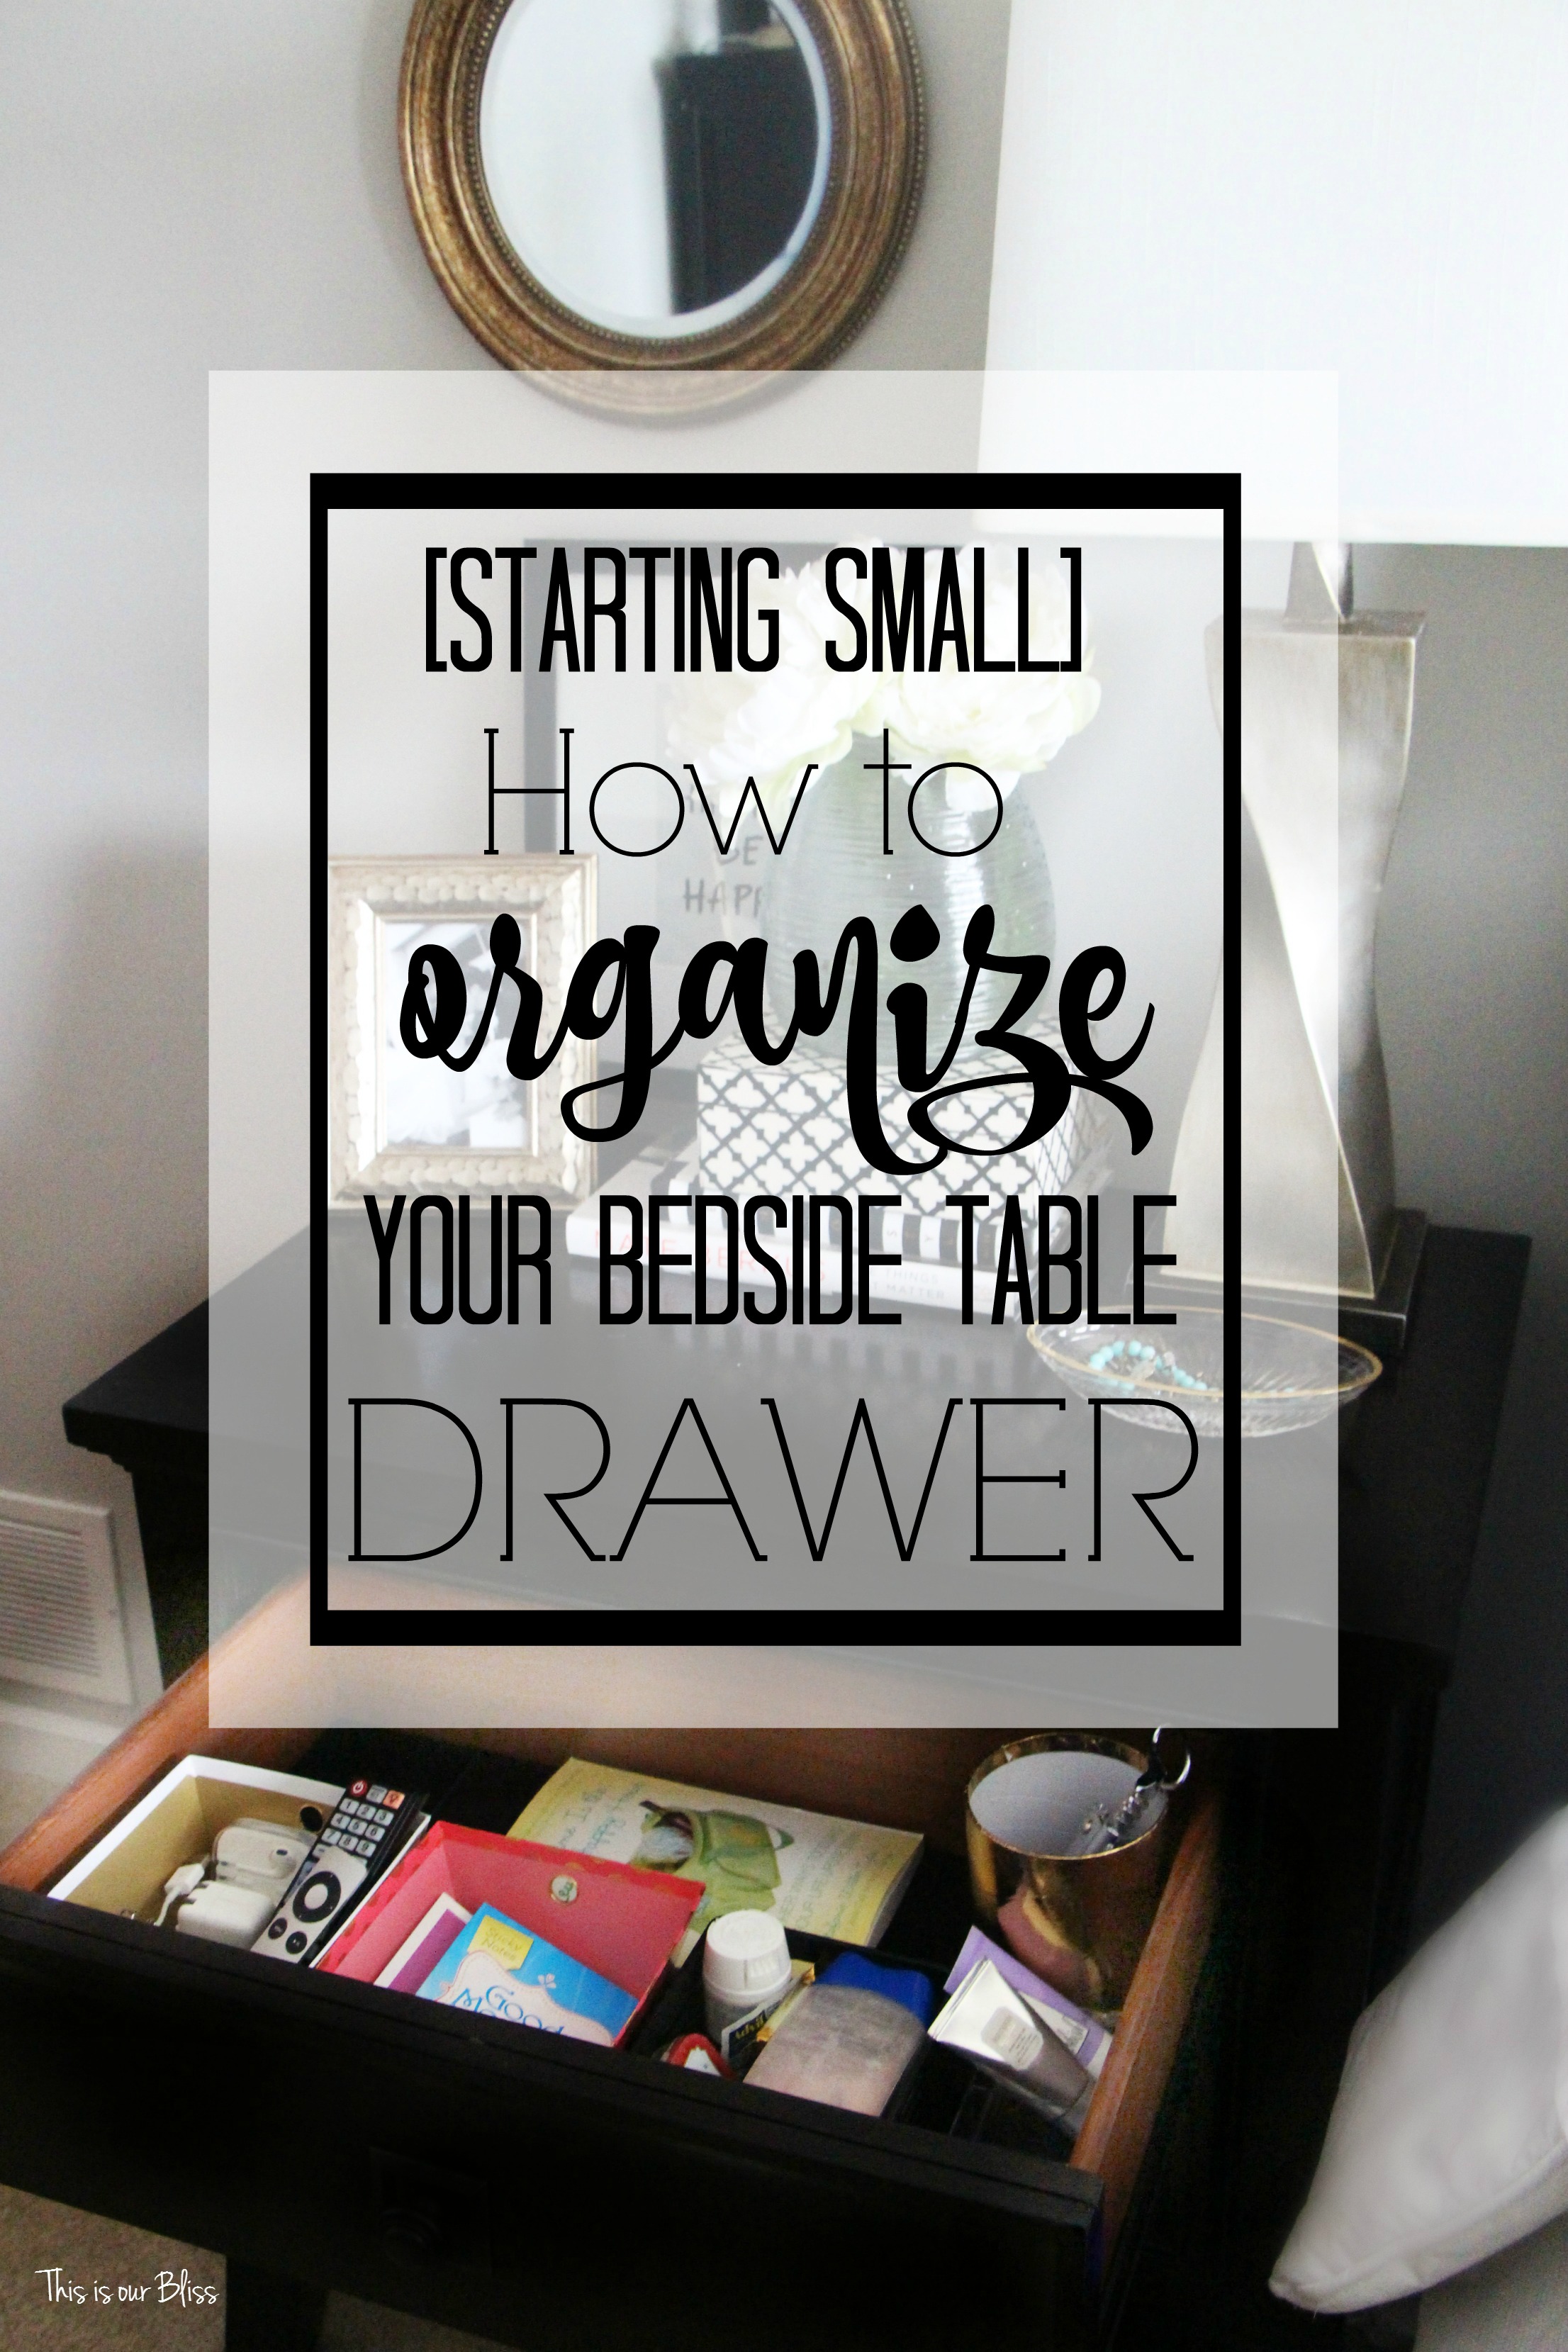 starting small How to organize your bedside table drawer - nightstand organization This is our Bliss www.thisisourbliss.com